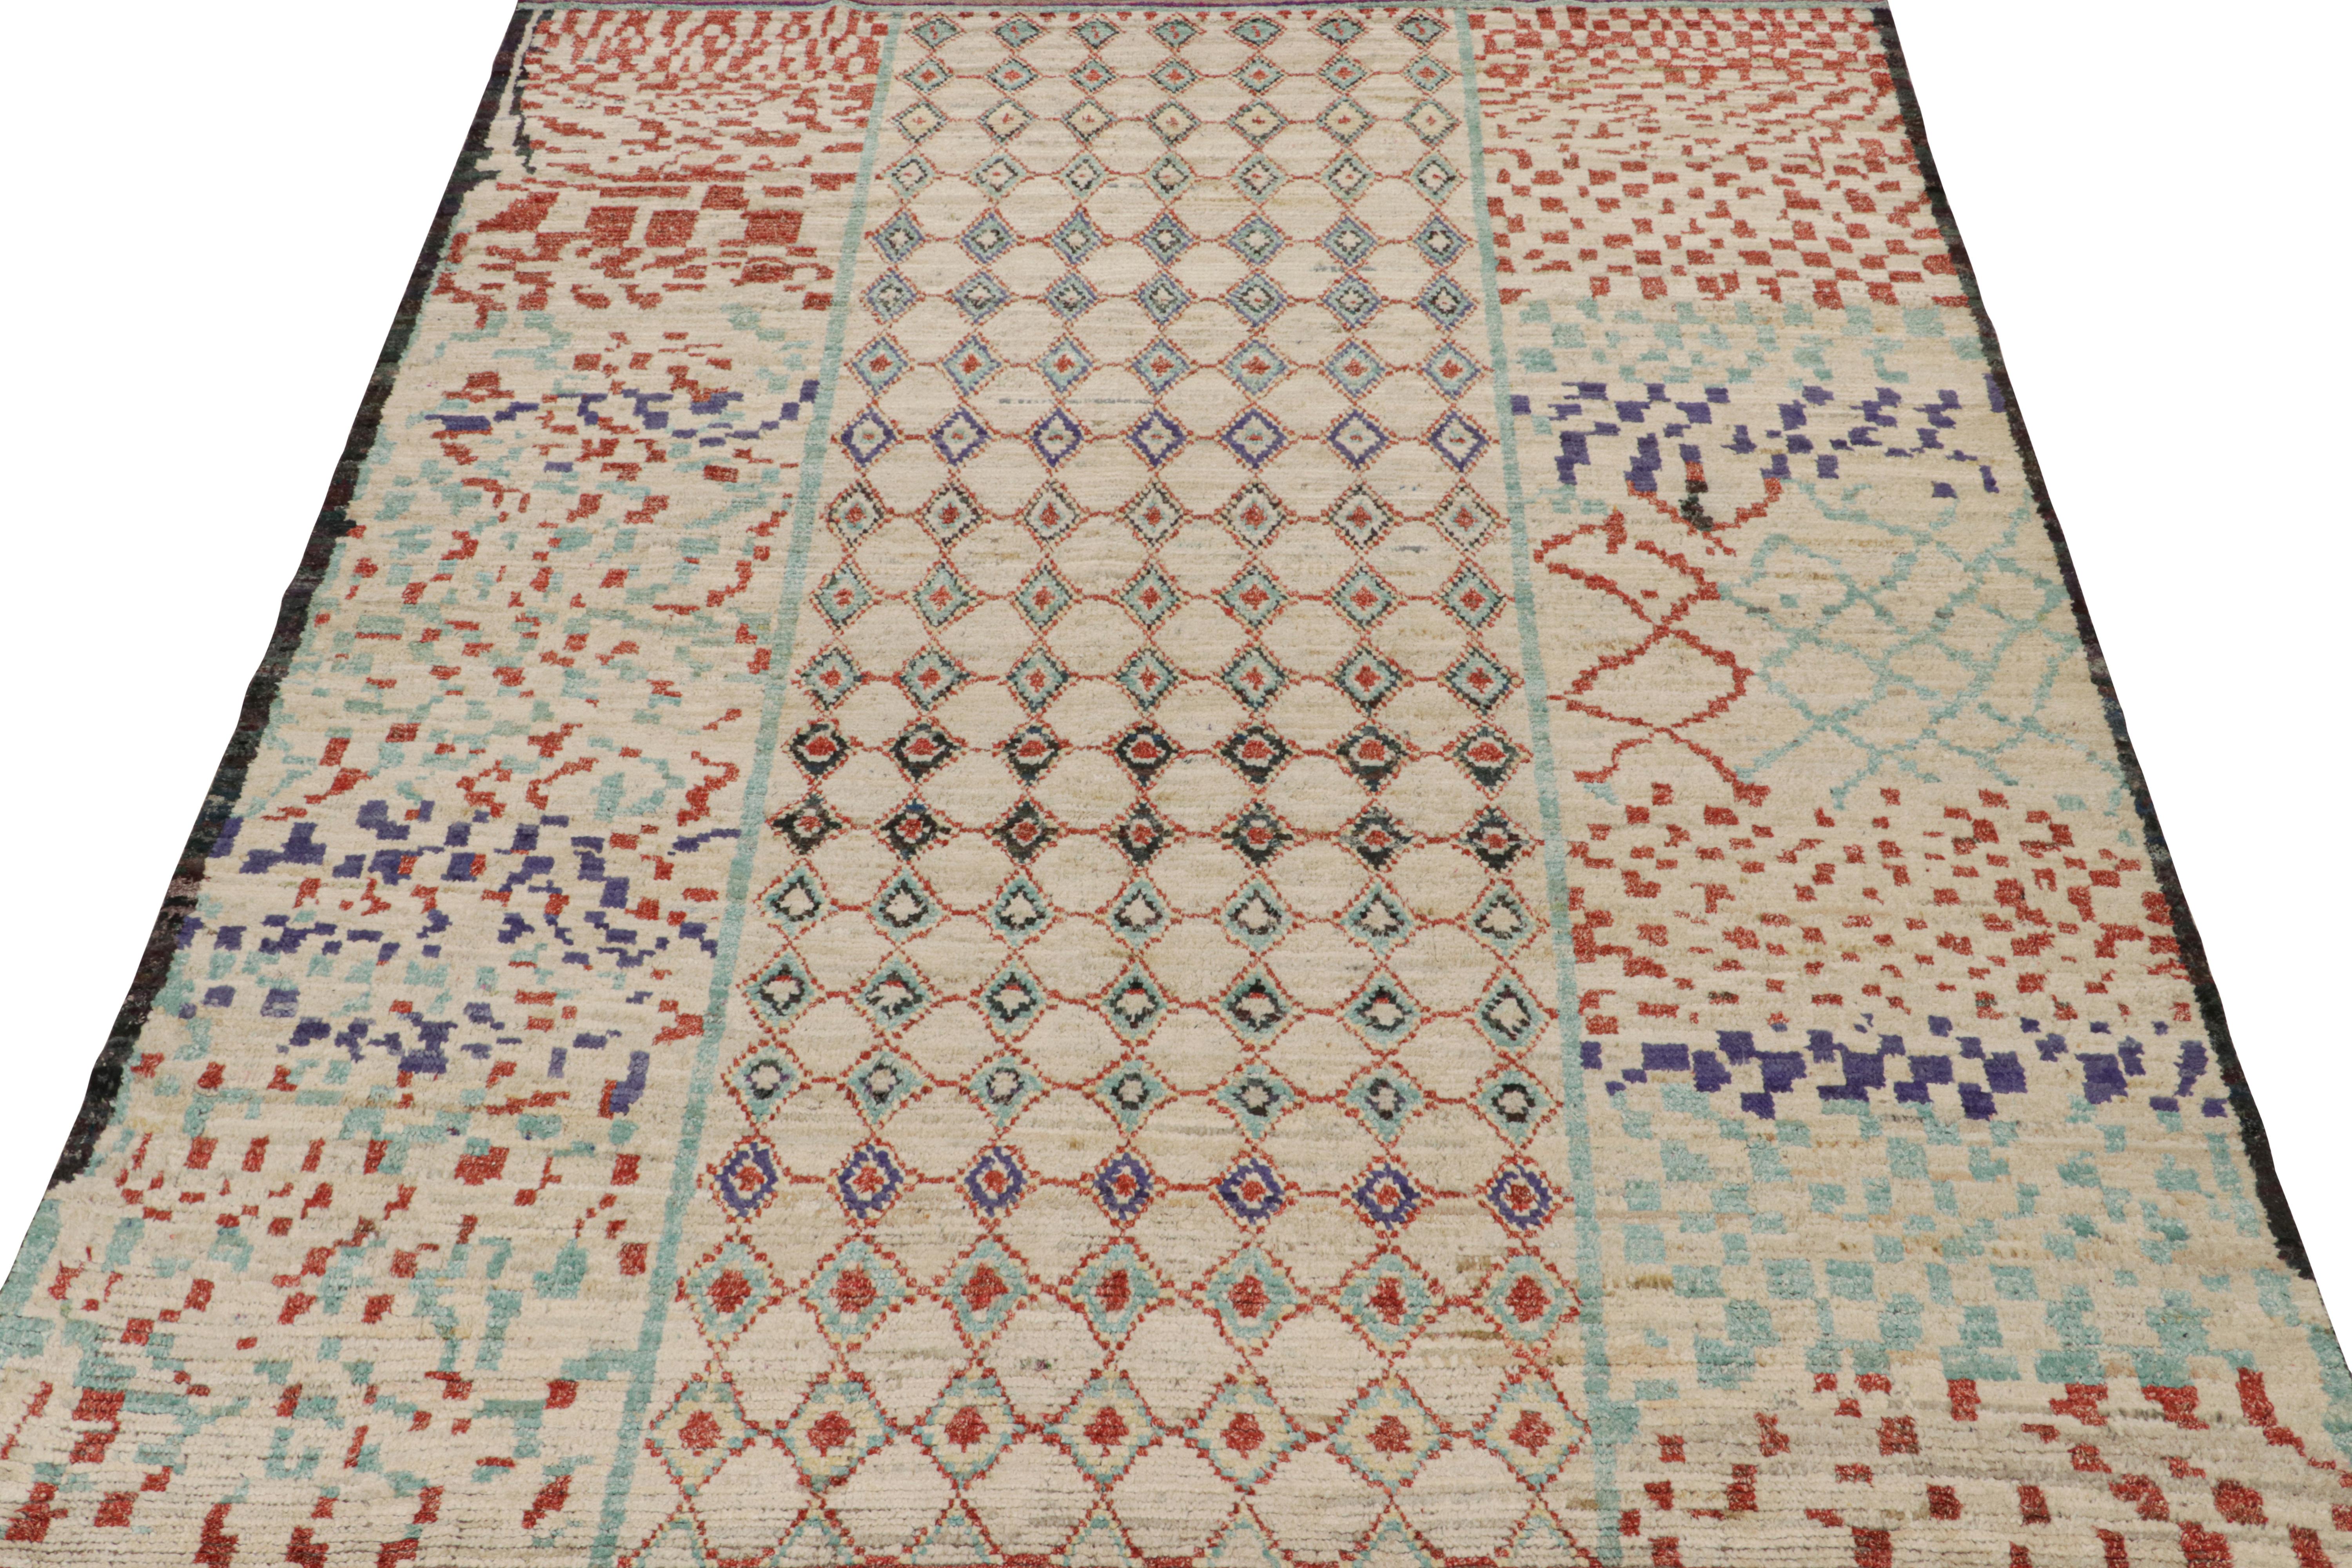 Tribal Rug & Kilim’s Moroccan Style Rug in Beige, Red & Blue Geometric Patterns For Sale